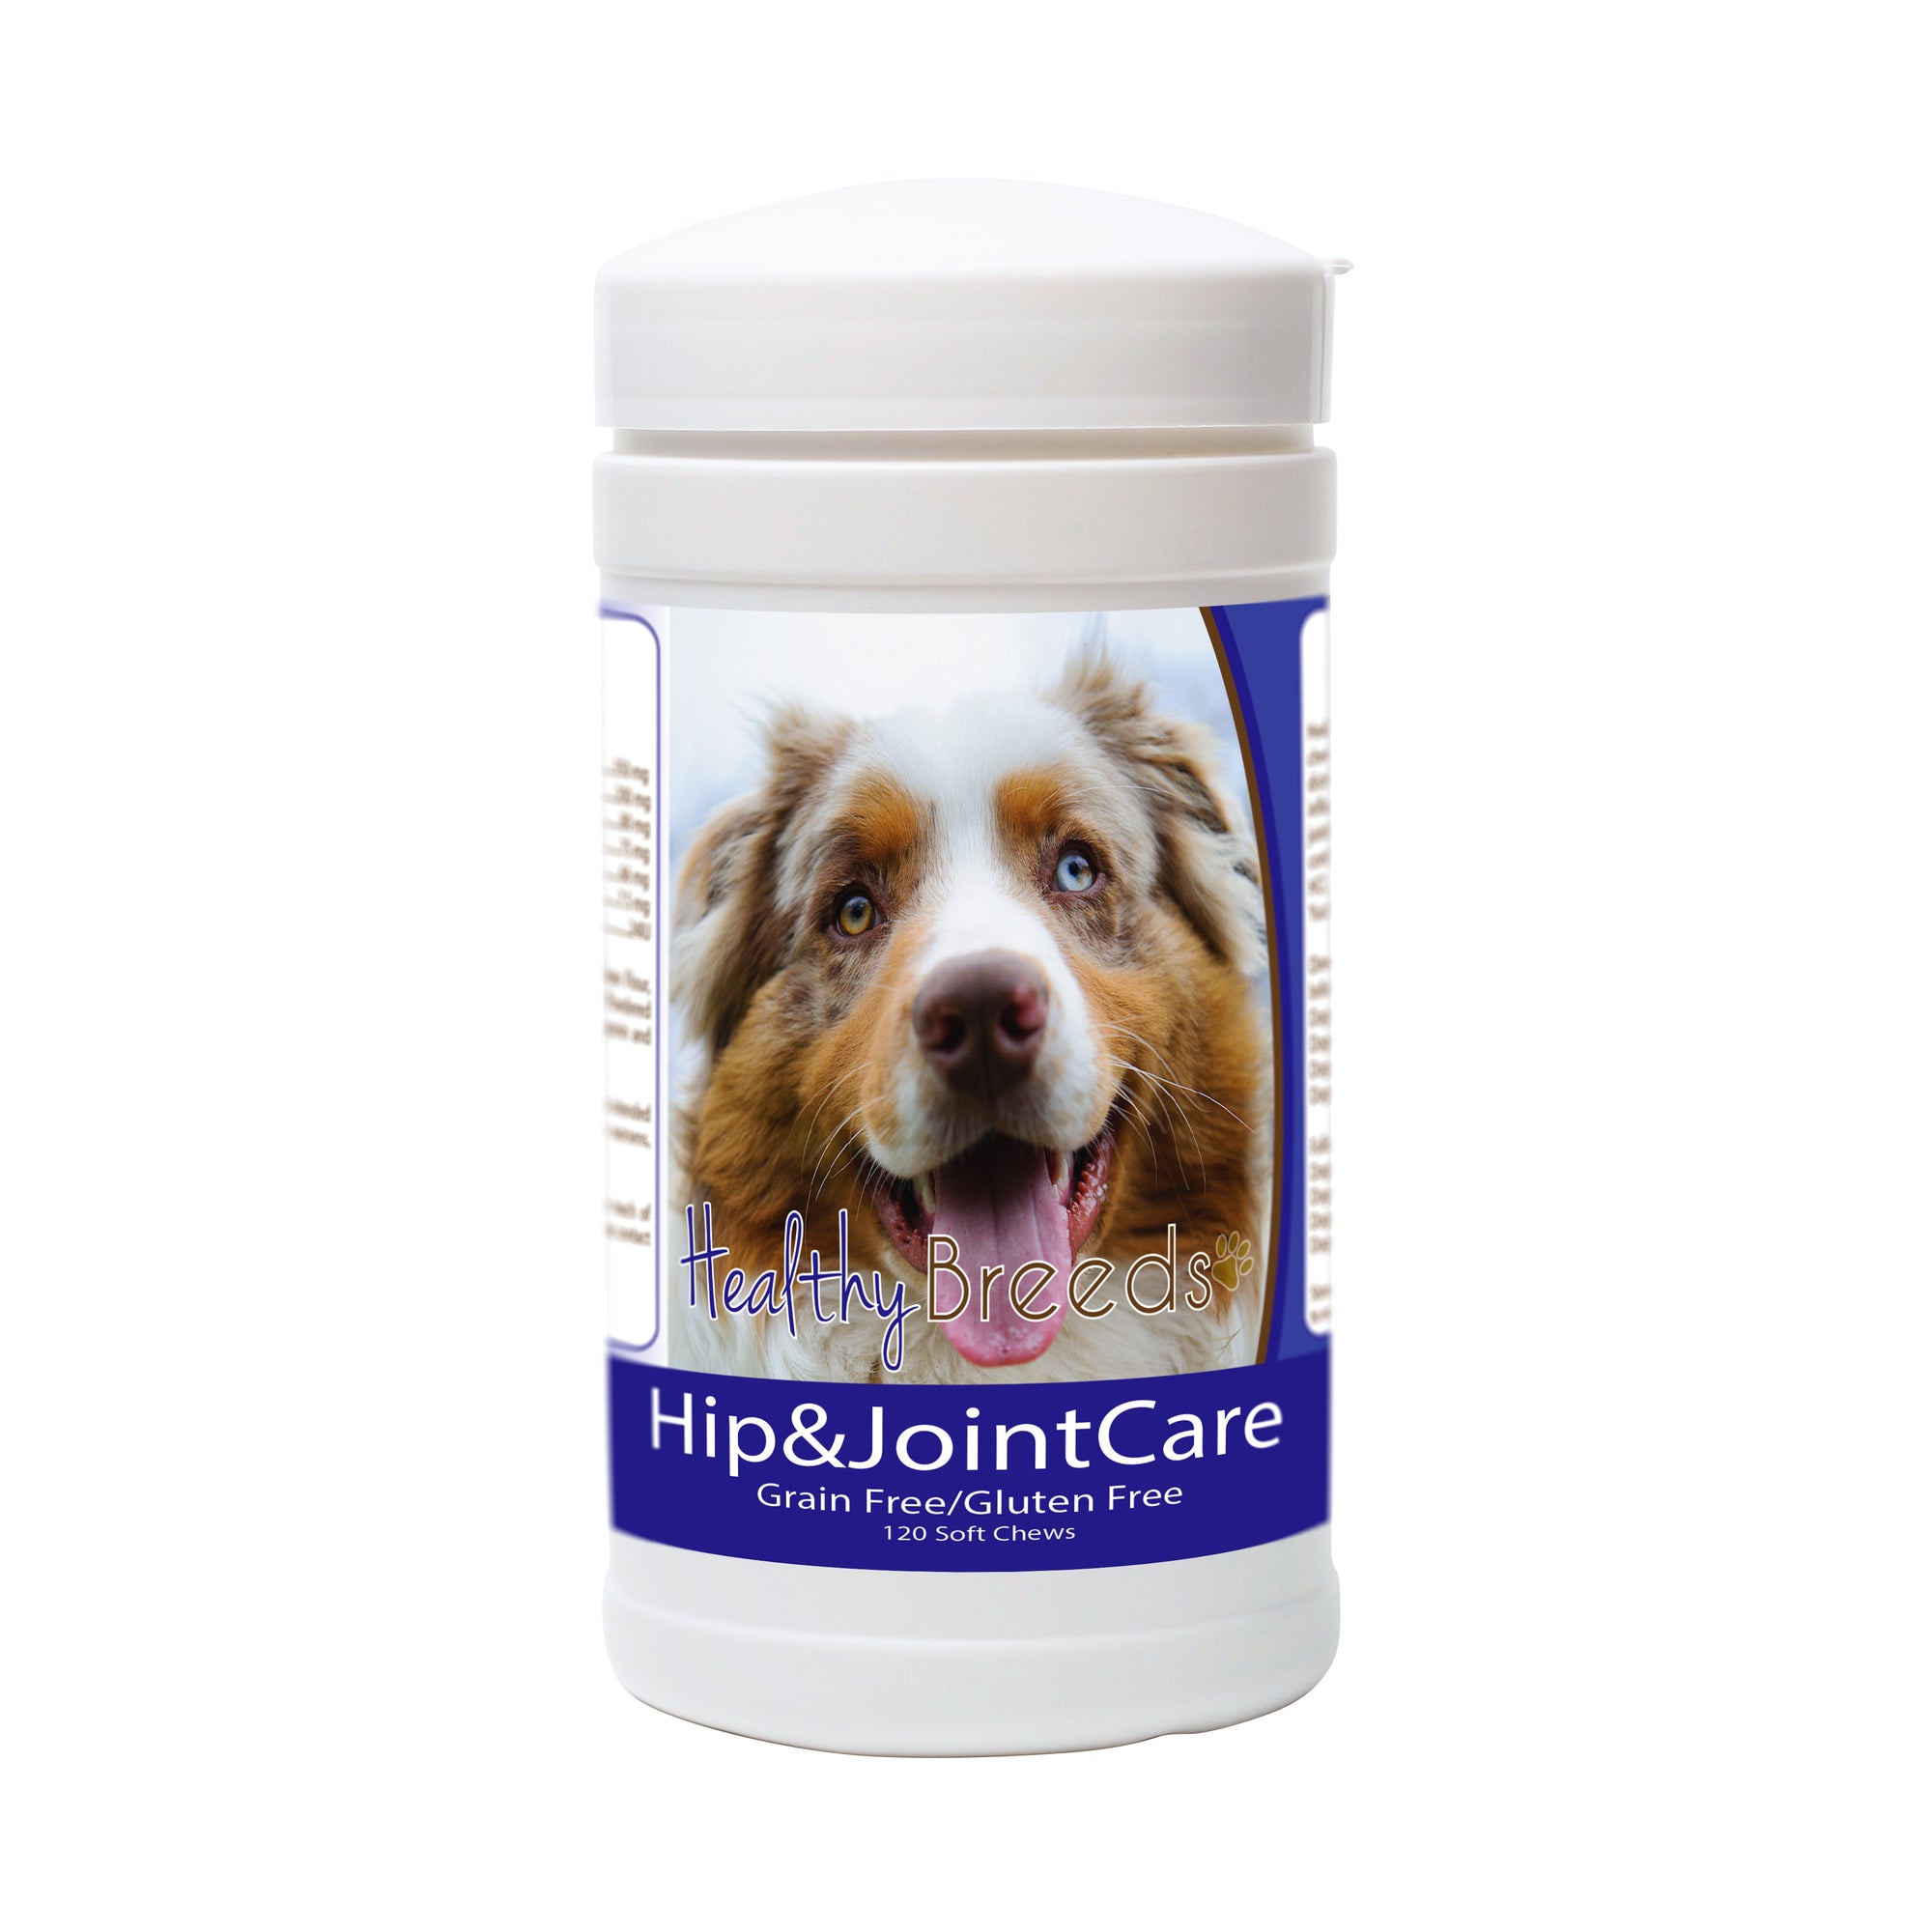 Healthy Breeds Australian Shepherd Hip and Joint Care 120 Count